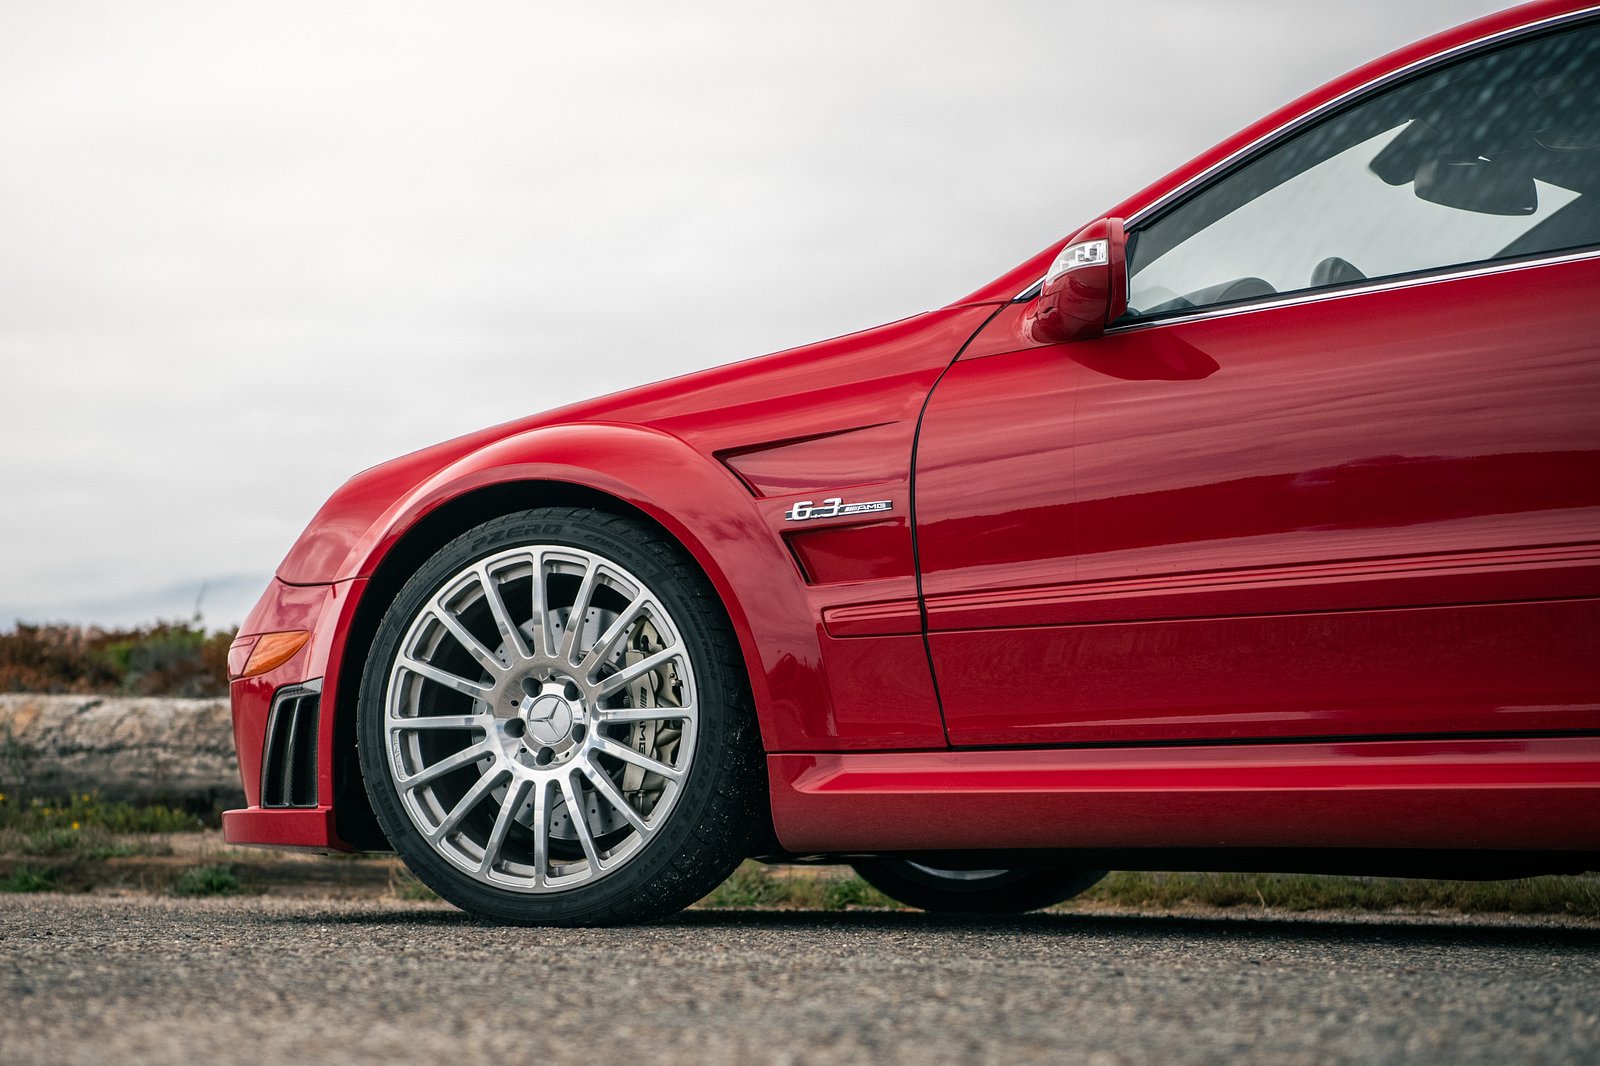 Driven: The Mercedes-Benz CLK AMG Black Series Is A Modern Classic That  Needs Anger Management